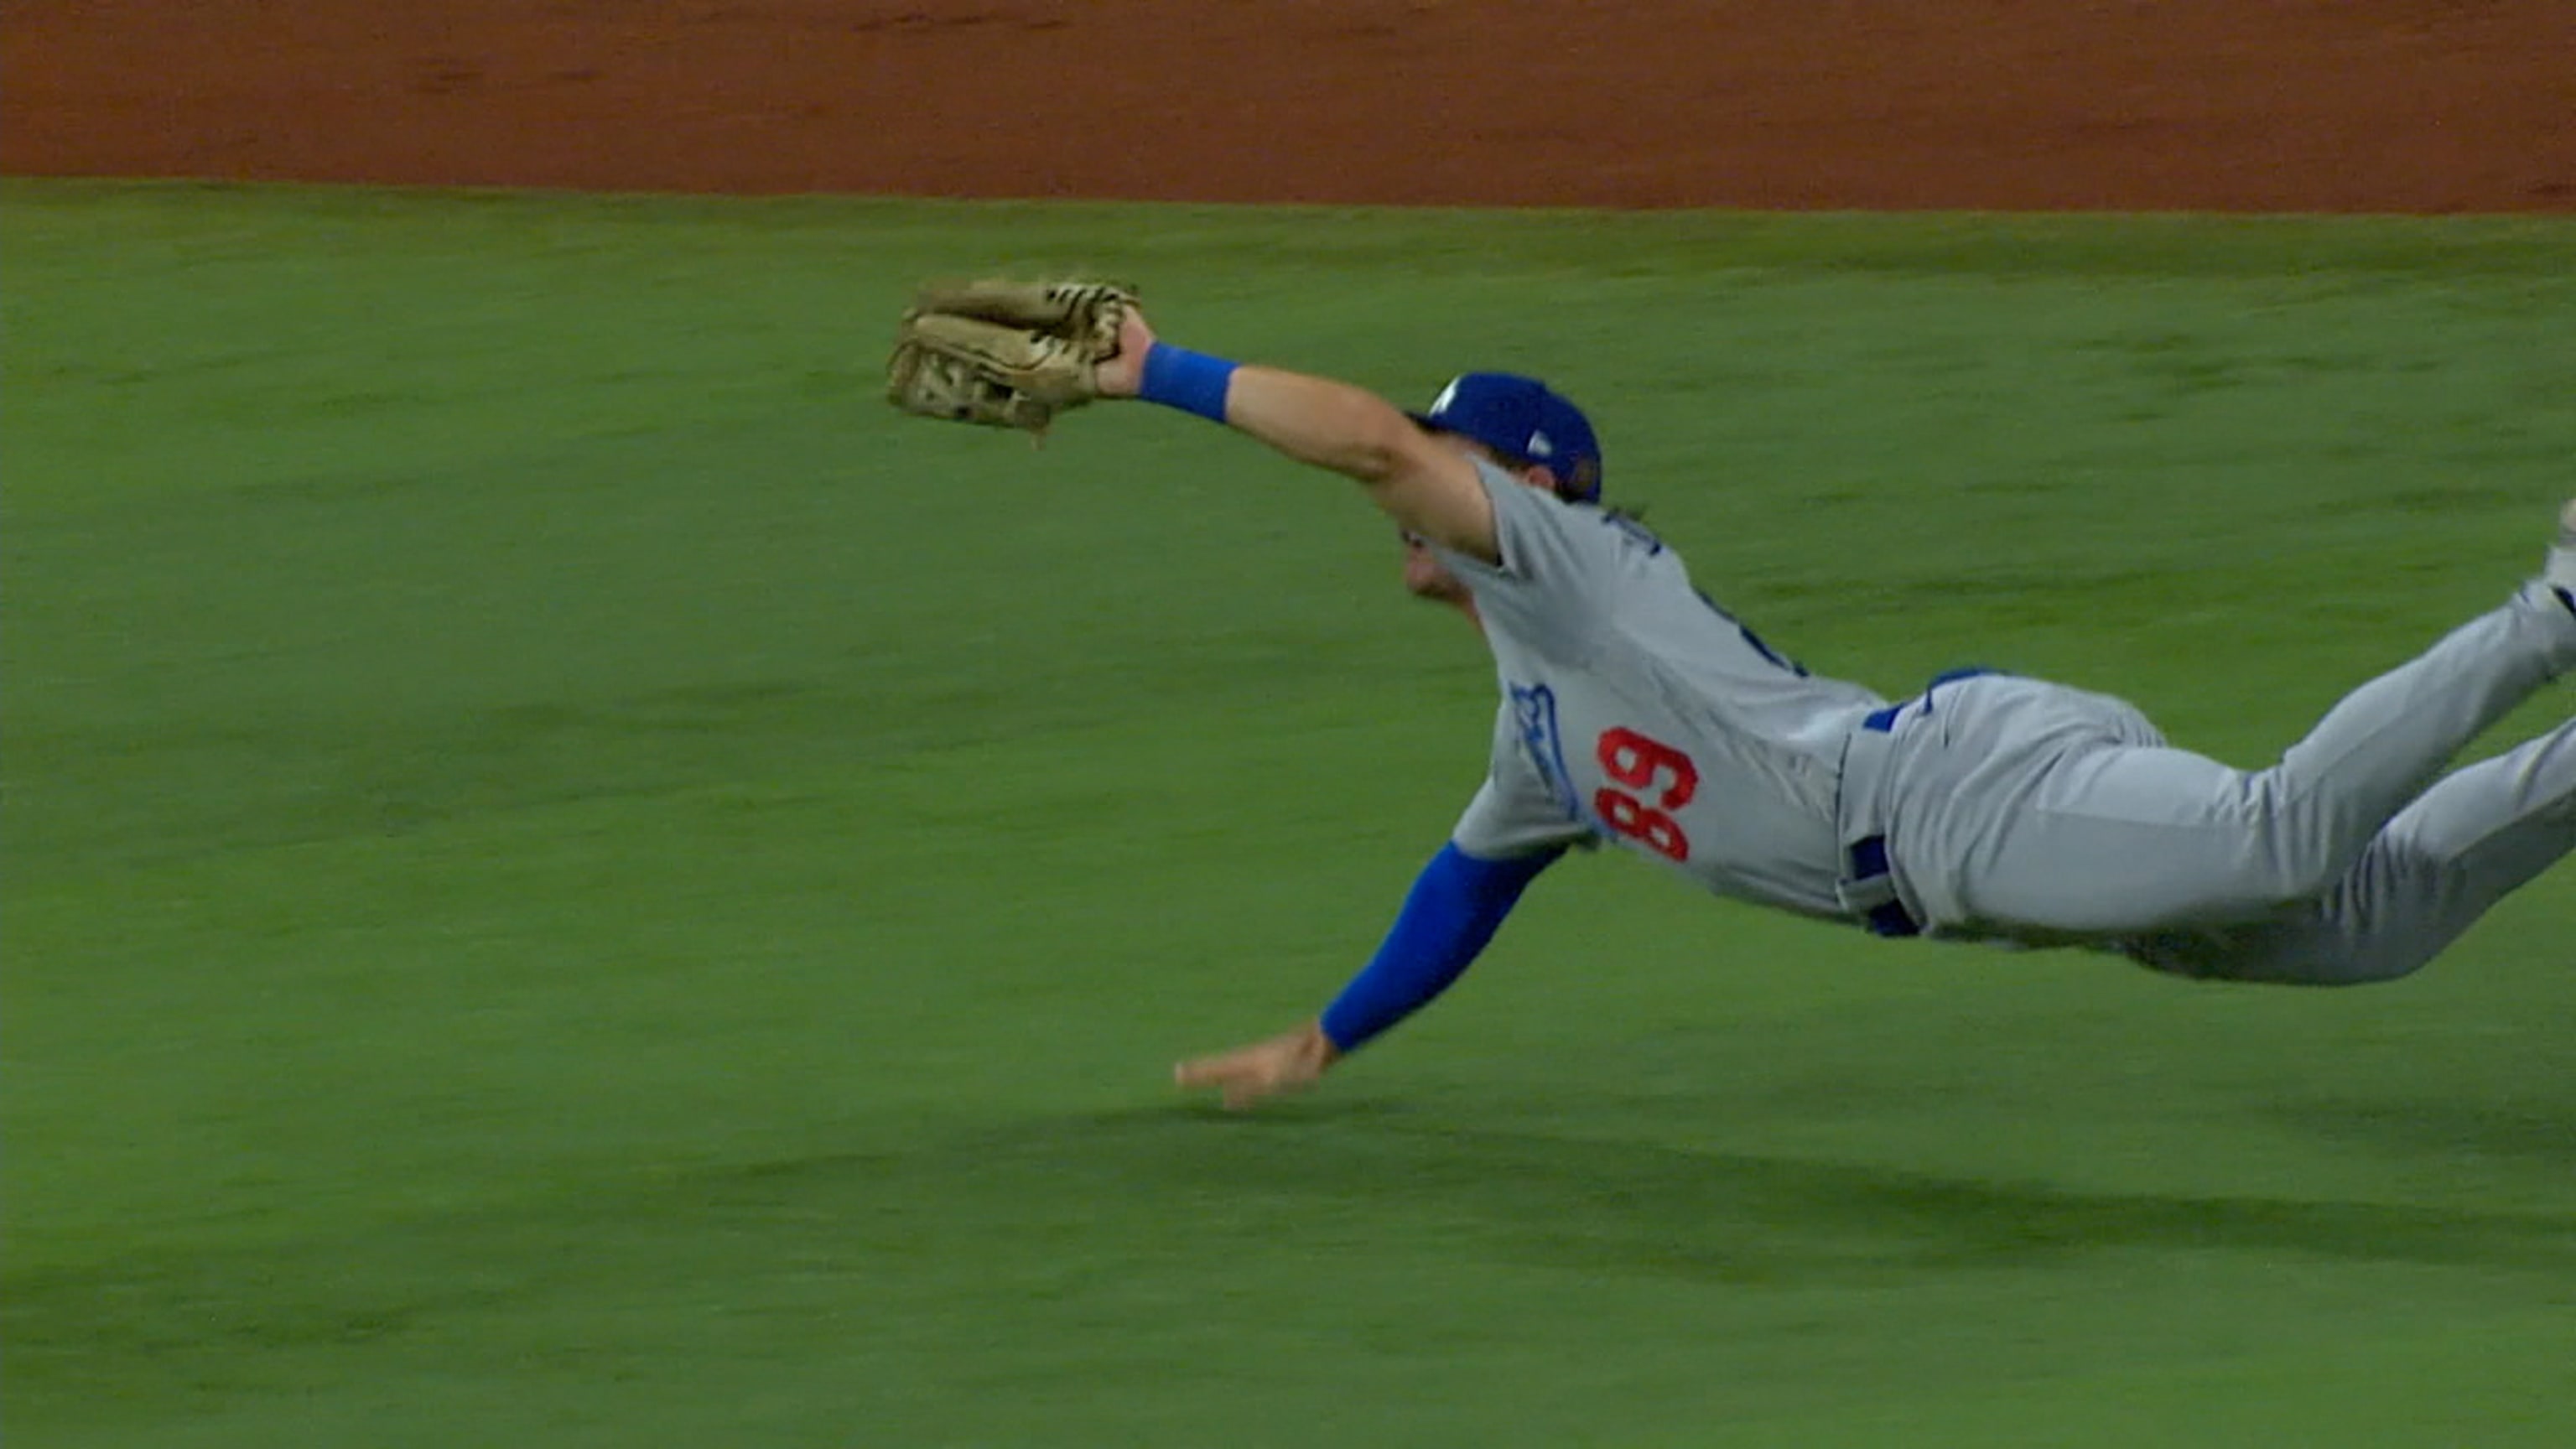 Jonny Deluca makes two incredible catches in a row in Dodgers' win